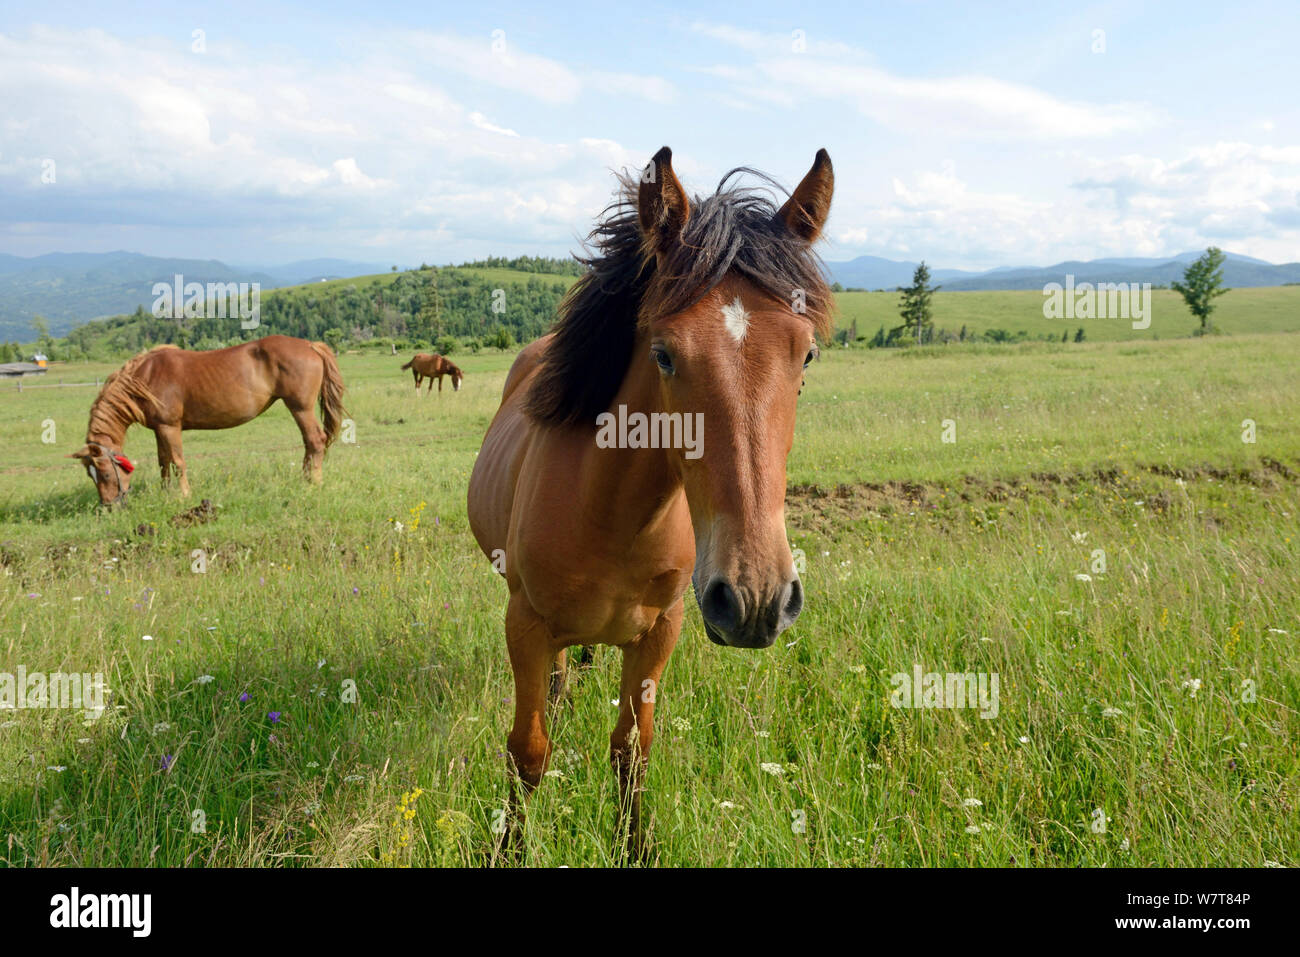 Hutsul foal and mare (Equus caballus) in flower-rich pasture in the foothills of the Carpathian Mountains, Ukraine, June 2013. Stock Photo